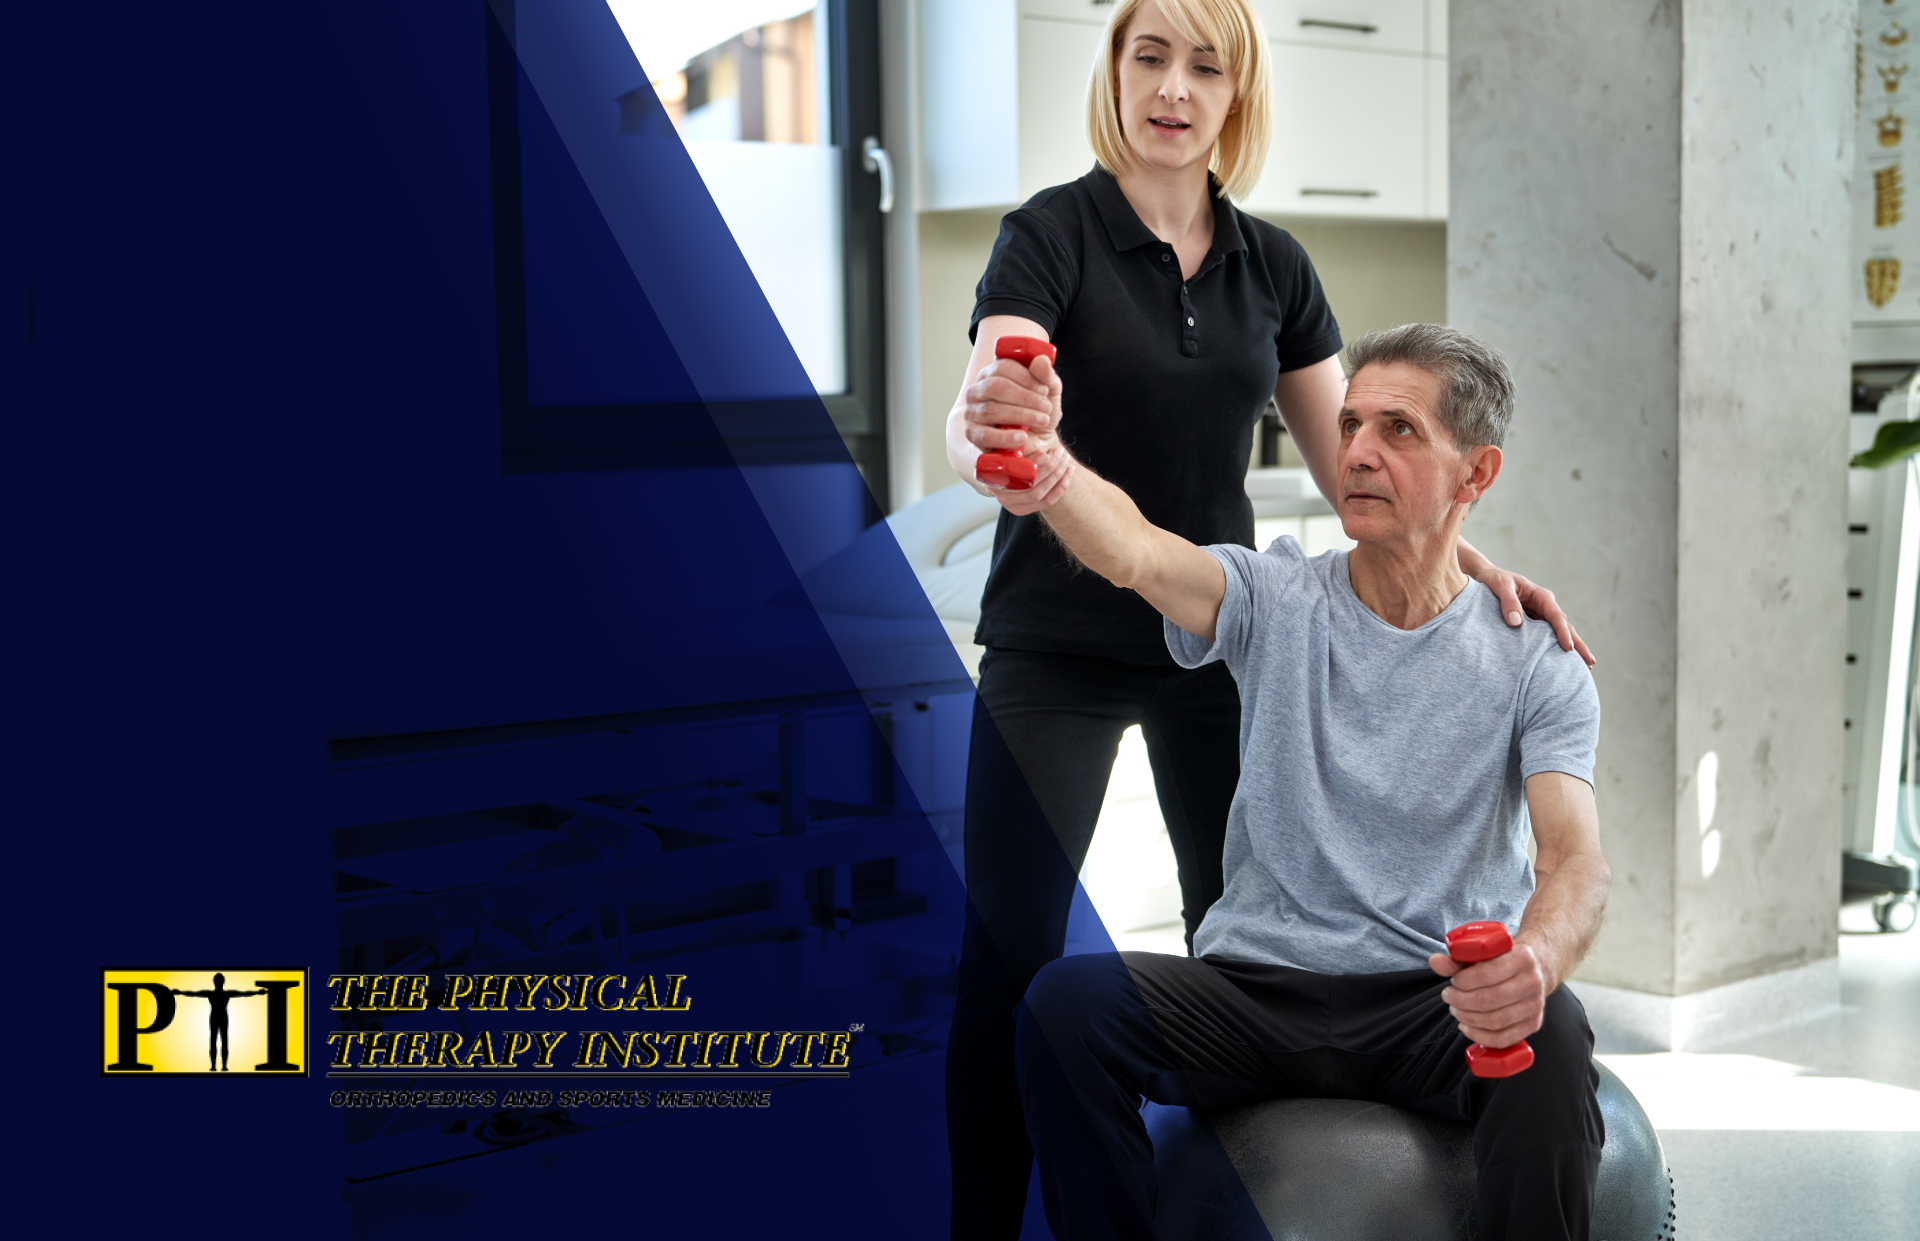 How The Physical Therapy Institute Increased Patient Volume with WelcomeWare